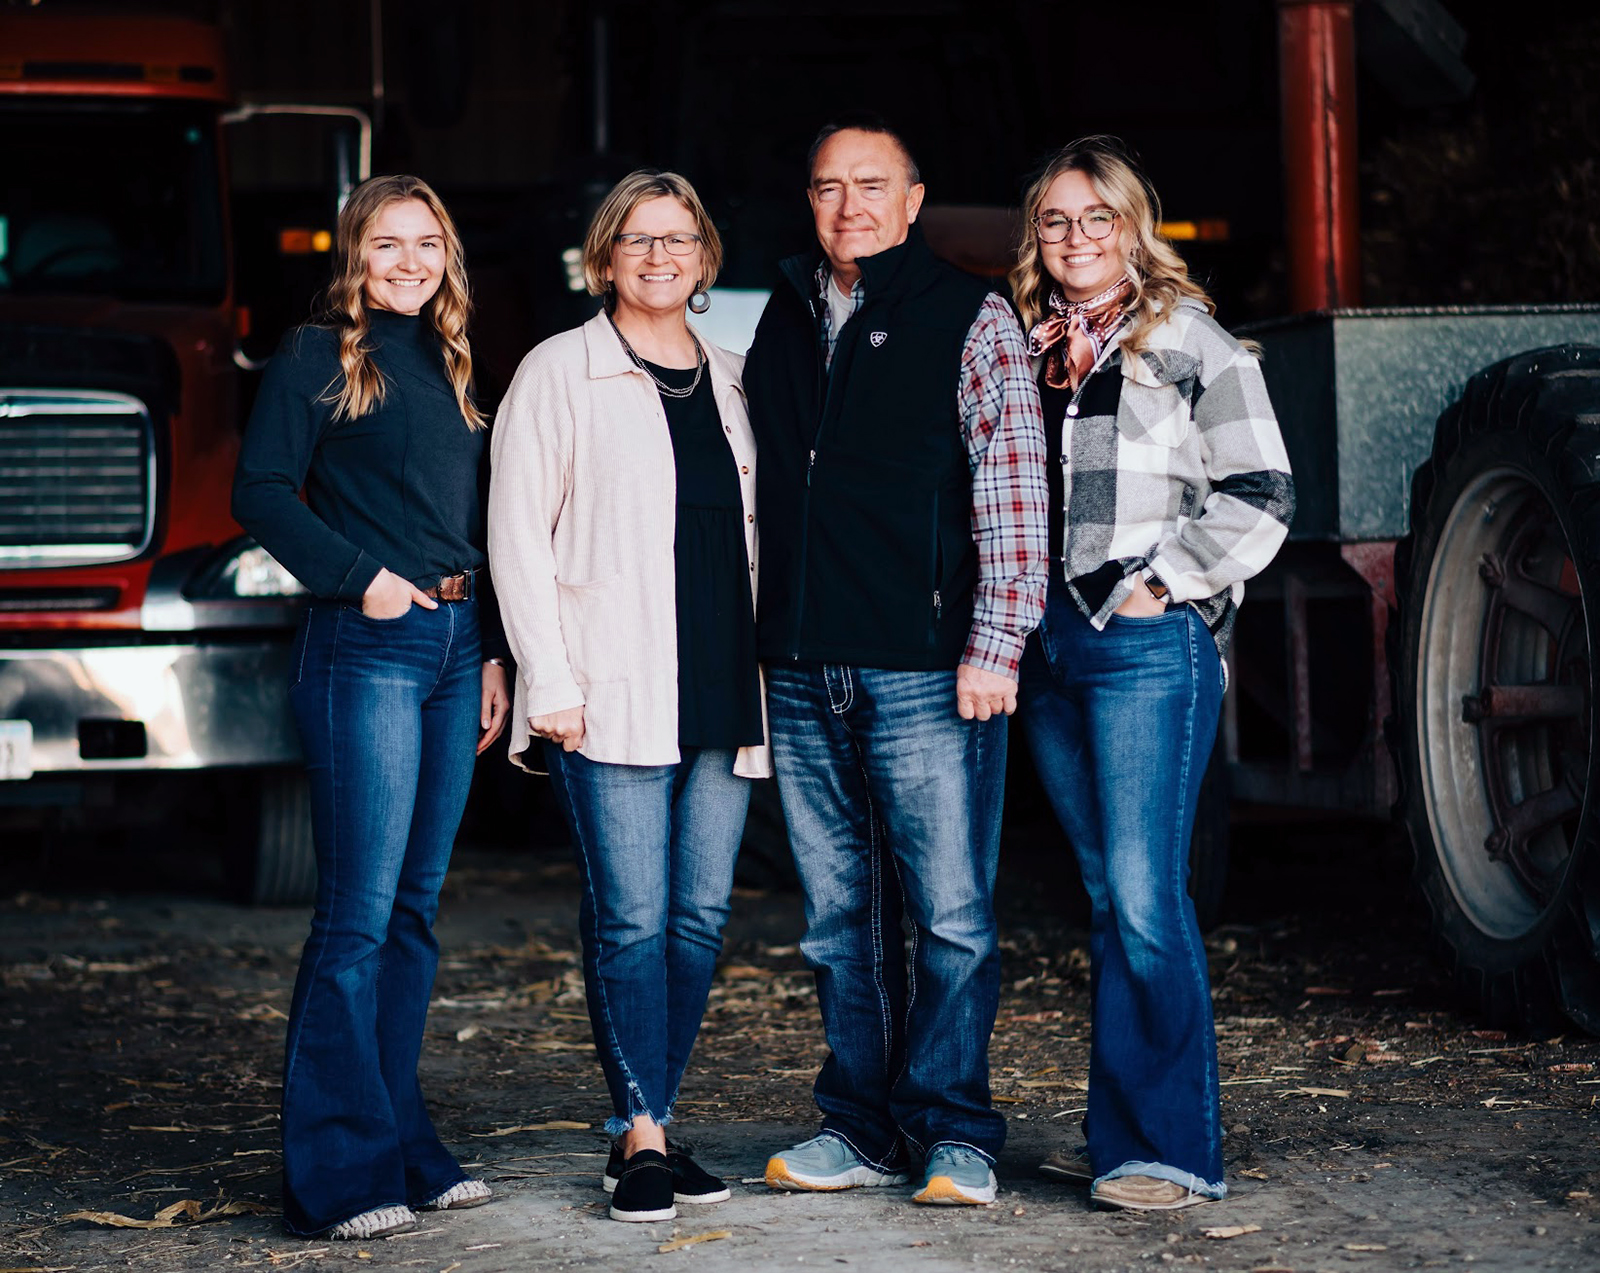 Kerri Bell and her family - a husband and two daughters - smile for a family photo in the entrance of a farm storage shed.